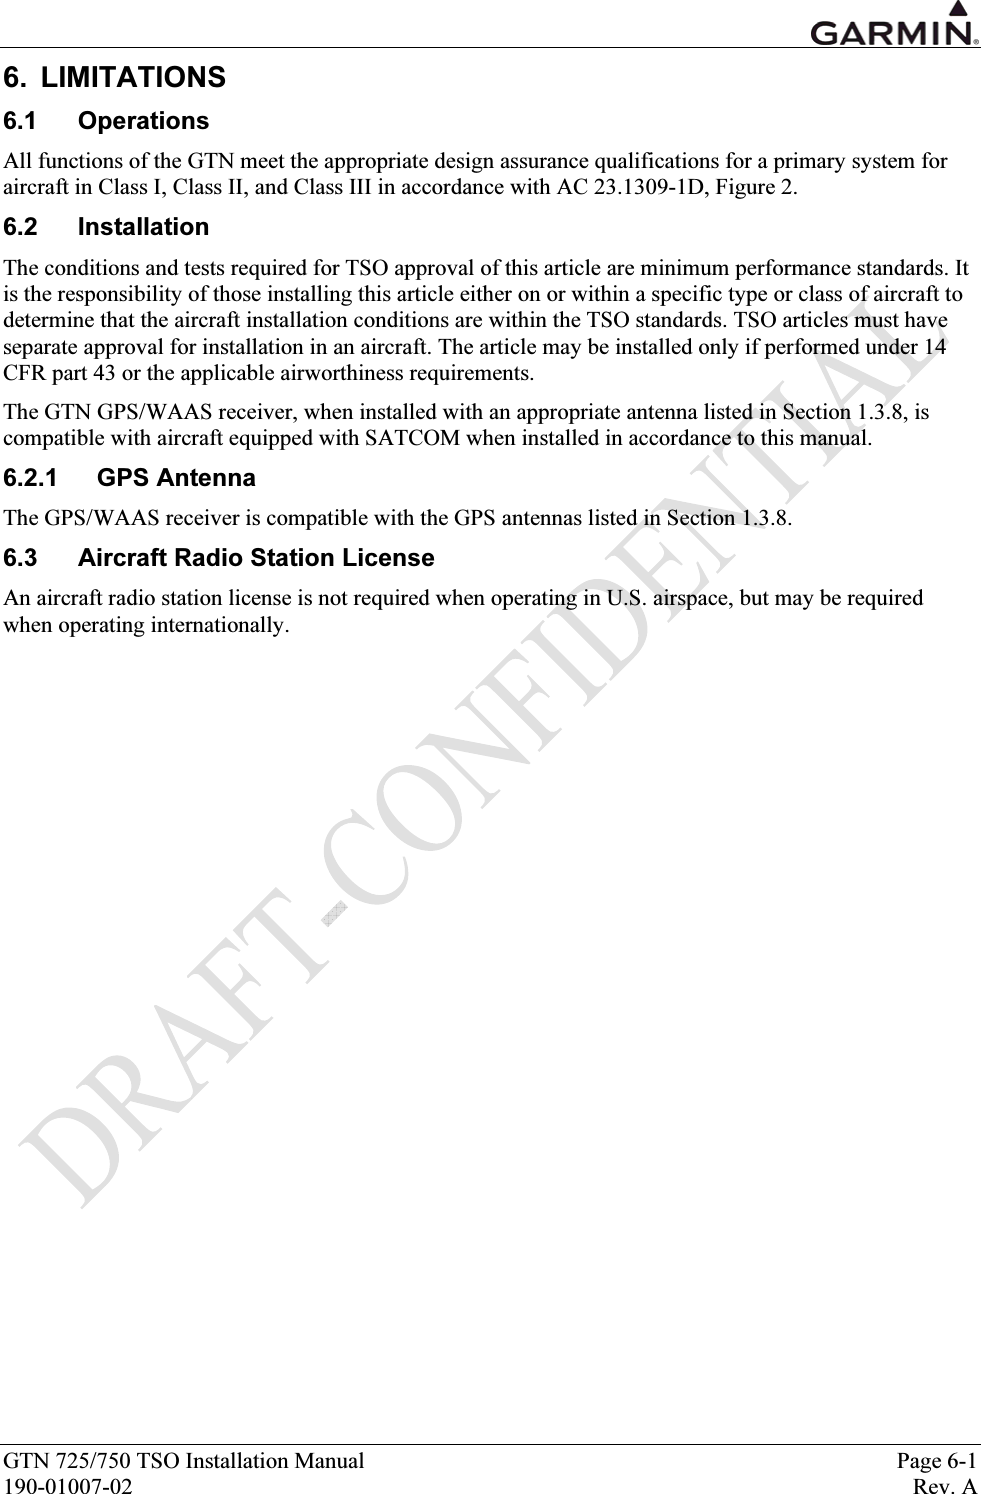  GTN 725/750 TSO Installation Manual  Page 6-1 190-01007-02  Rev. A 6. LIMITATIONS 6.1 Operations All functions of the GTN meet the appropriate design assurance qualifications for a primary system for aircraft in Class I, Class II, and Class III in accordance with AC 23.1309-1D, Figure 2.  6.2 Installation The conditions and tests required for TSO approval of this article are minimum performance standards. It is the responsibility of those installing this article either on or within a specific type or class of aircraft to determine that the aircraft installation conditions are within the TSO standards. TSO articles must have separate approval for installation in an aircraft. The article may be installed only if performed under 14 CFR part 43 or the applicable airworthiness requirements. The GTN GPS/WAAS receiver, when installed with an appropriate antenna listed in Section 1.3.8, is compatible with aircraft equipped with SATCOM when installed in accordance to this manual.  6.2.1 GPS Antenna The GPS/WAAS receiver is compatible with the GPS antennas listed in Section 1.3.8. 6.3  Aircraft Radio Station License An aircraft radio station license is not required when operating in U.S. airspace, but may be required when operating internationally.  